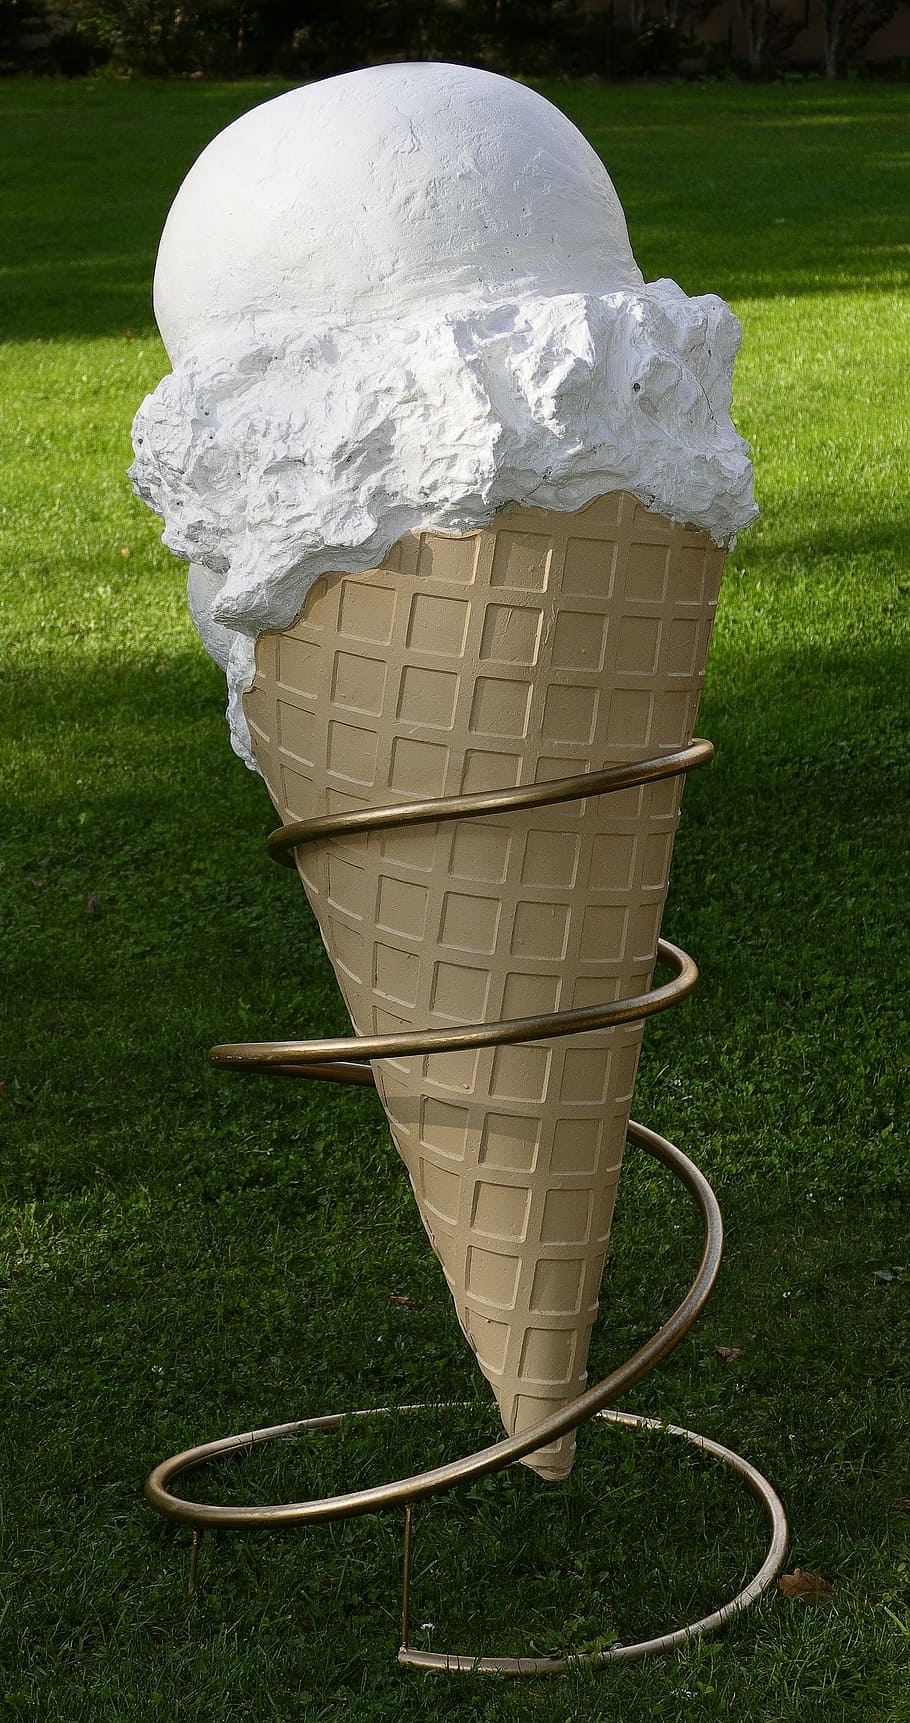 ice cream, waffle, advertising, advertising stands, eiswerbung, pleasure, benefit from, ice cream cone, temptation, summer